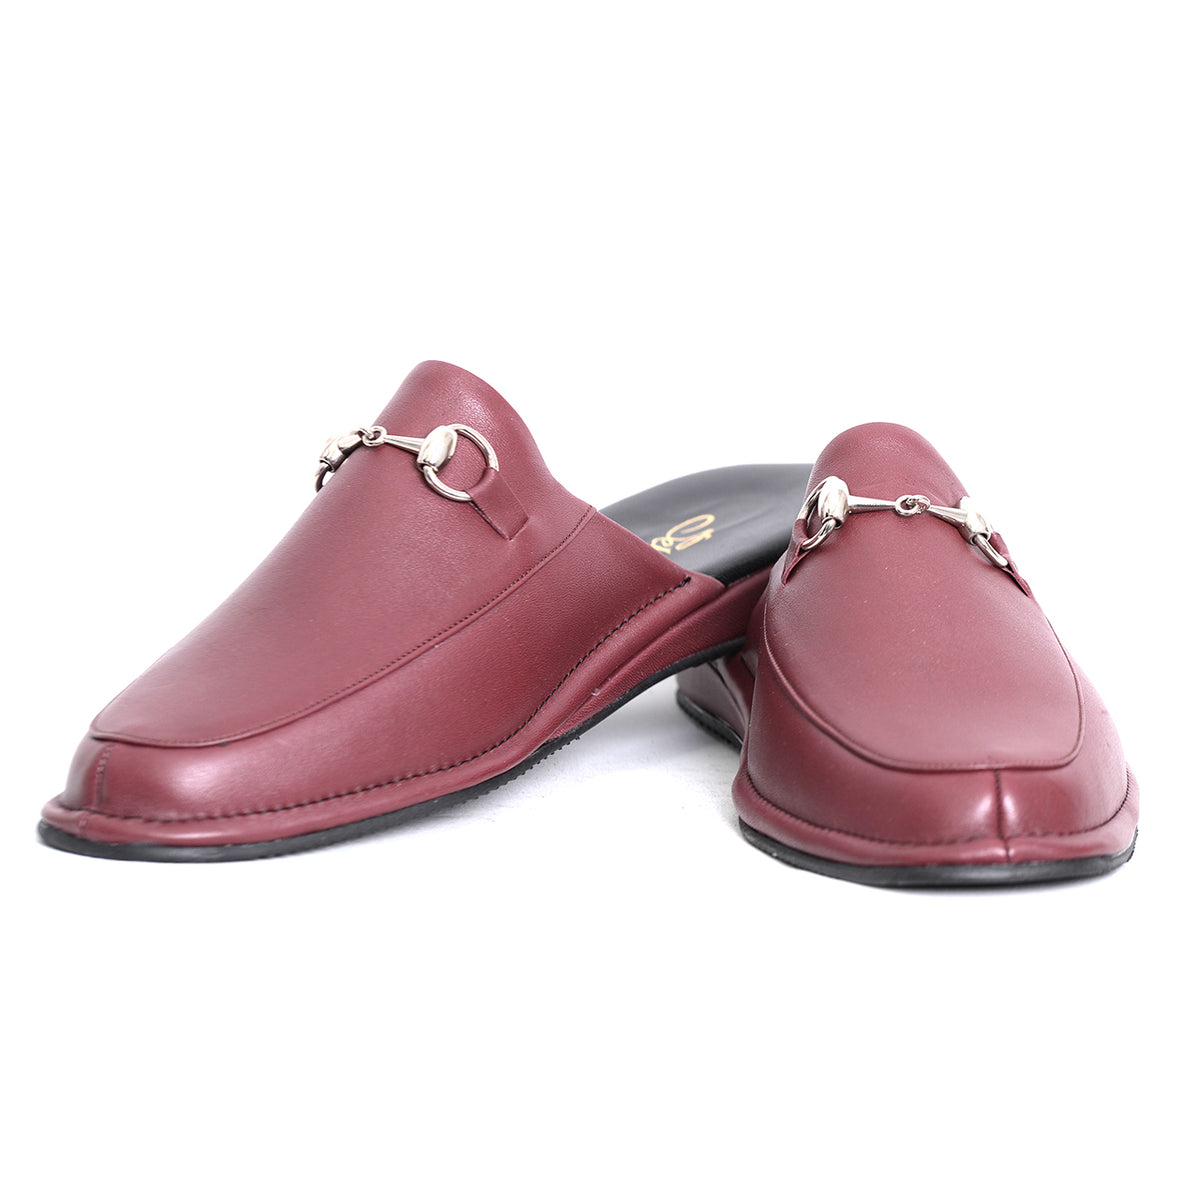 Prince Vino leather slippers with leather sole – Princetown Slippers